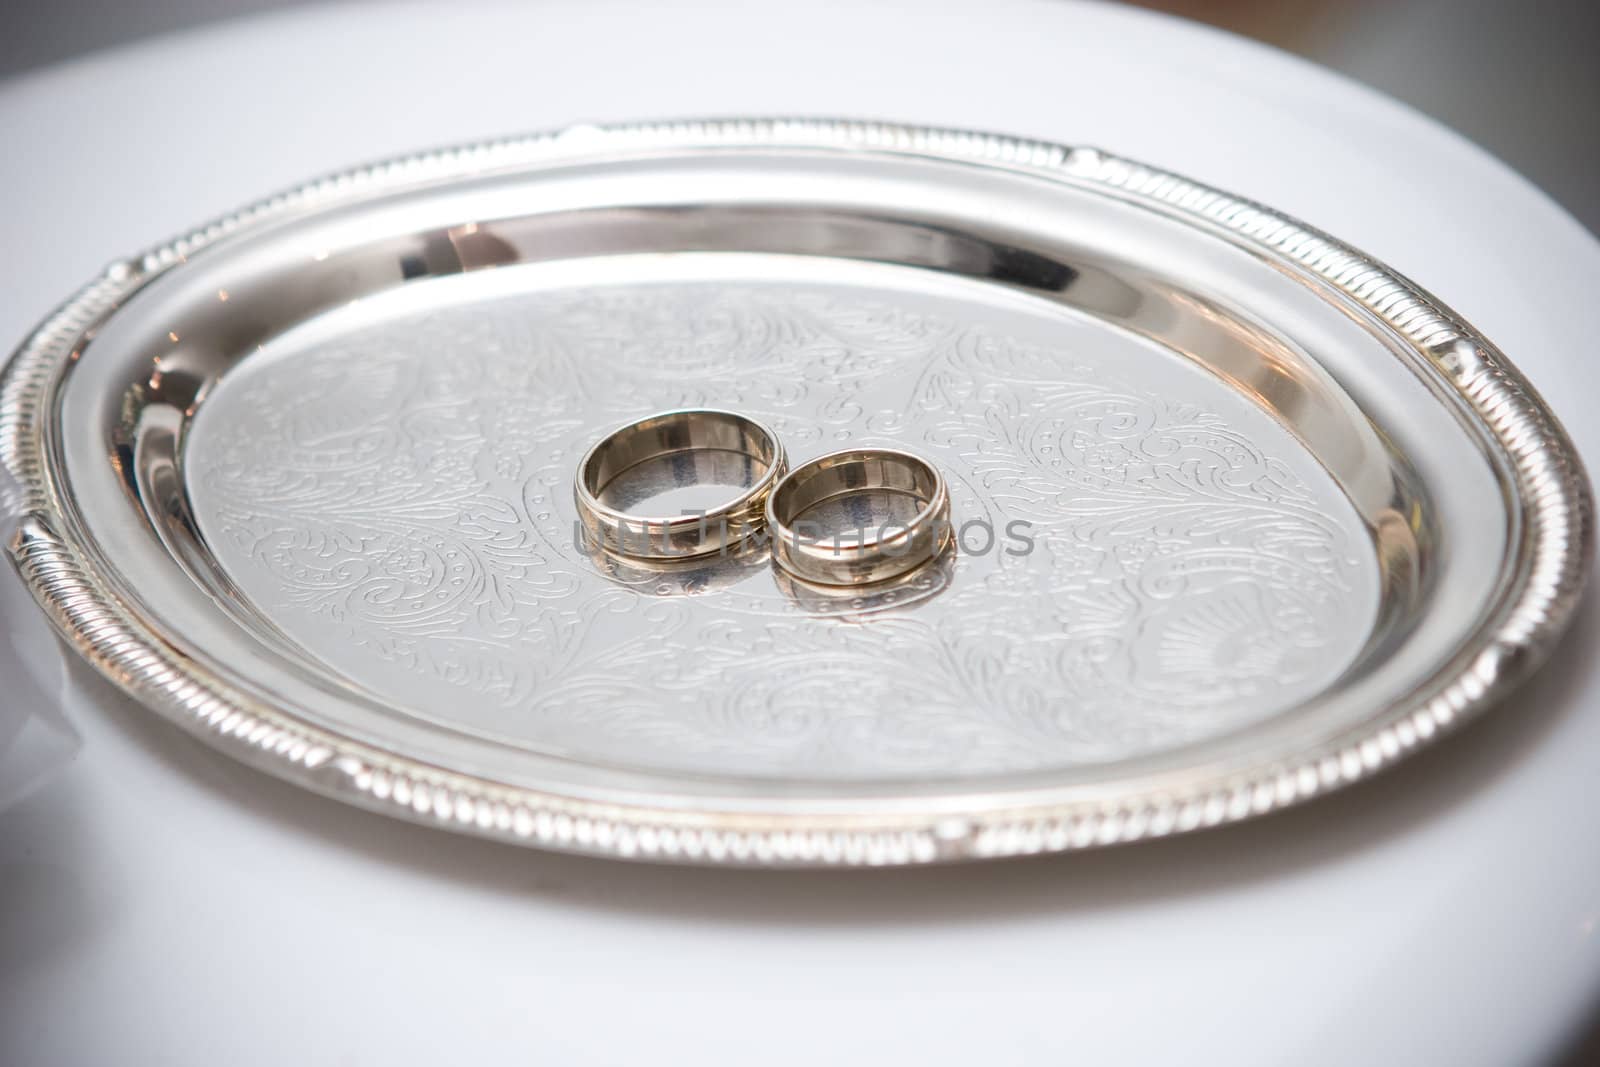 two wedding rings on the plate by vsurkov